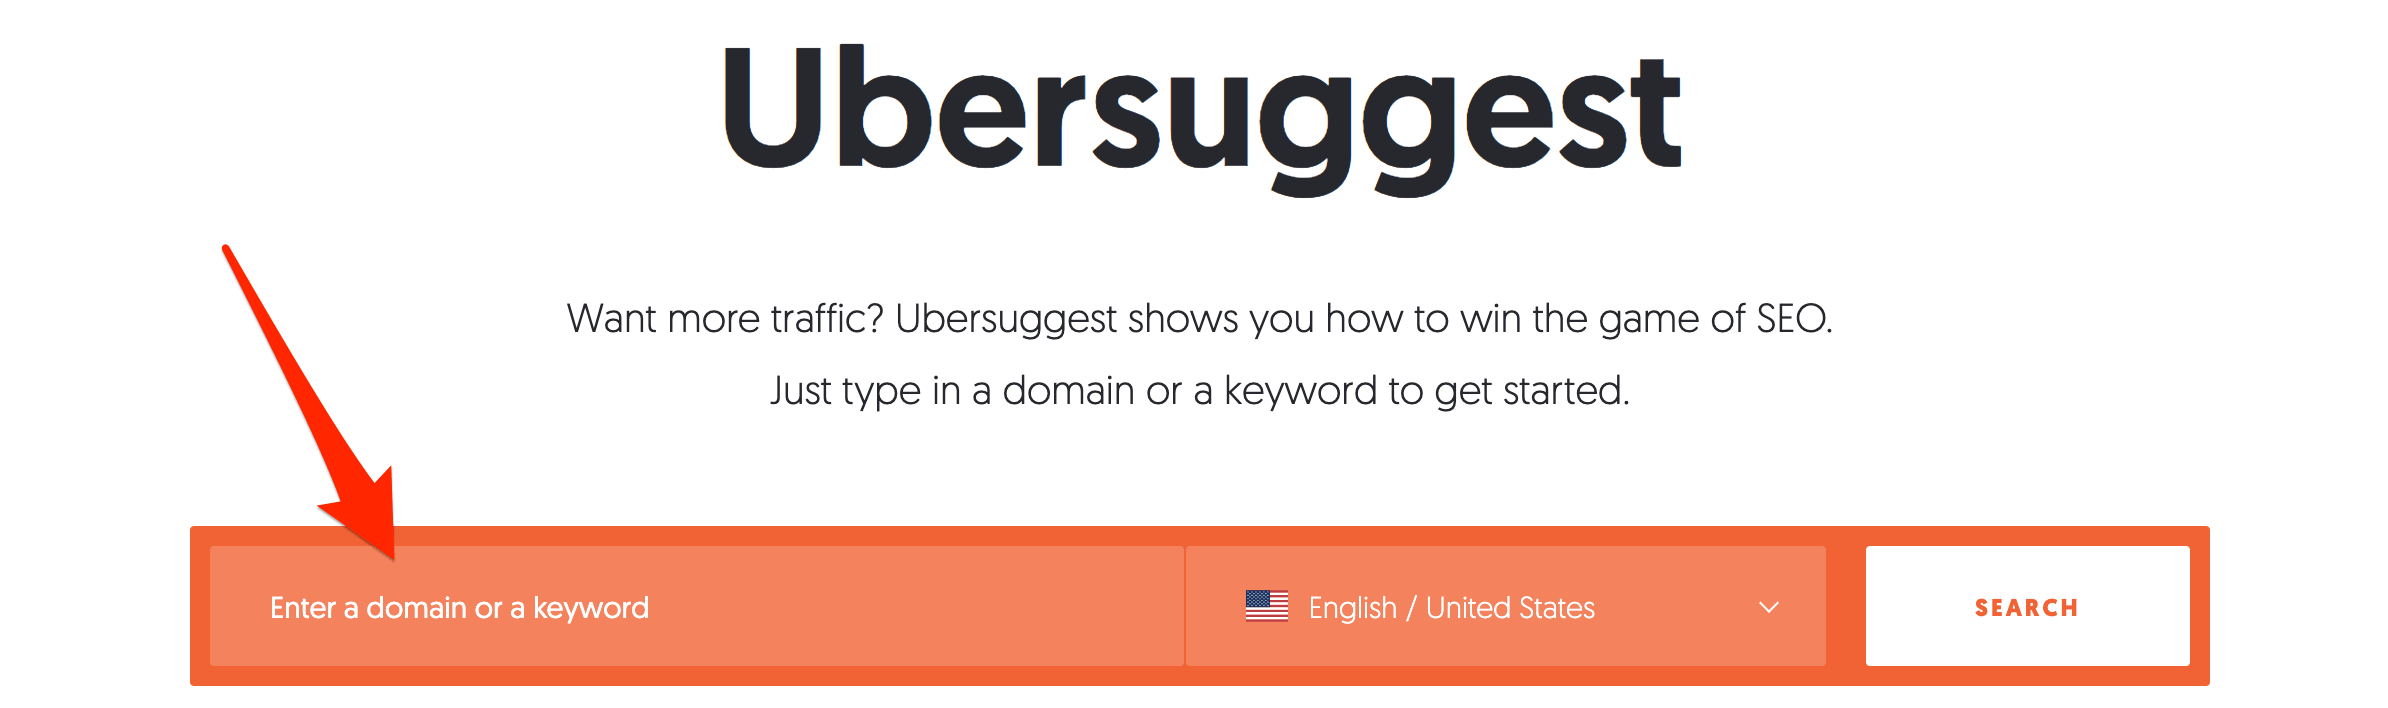 searching for keywords using Ubersuggest